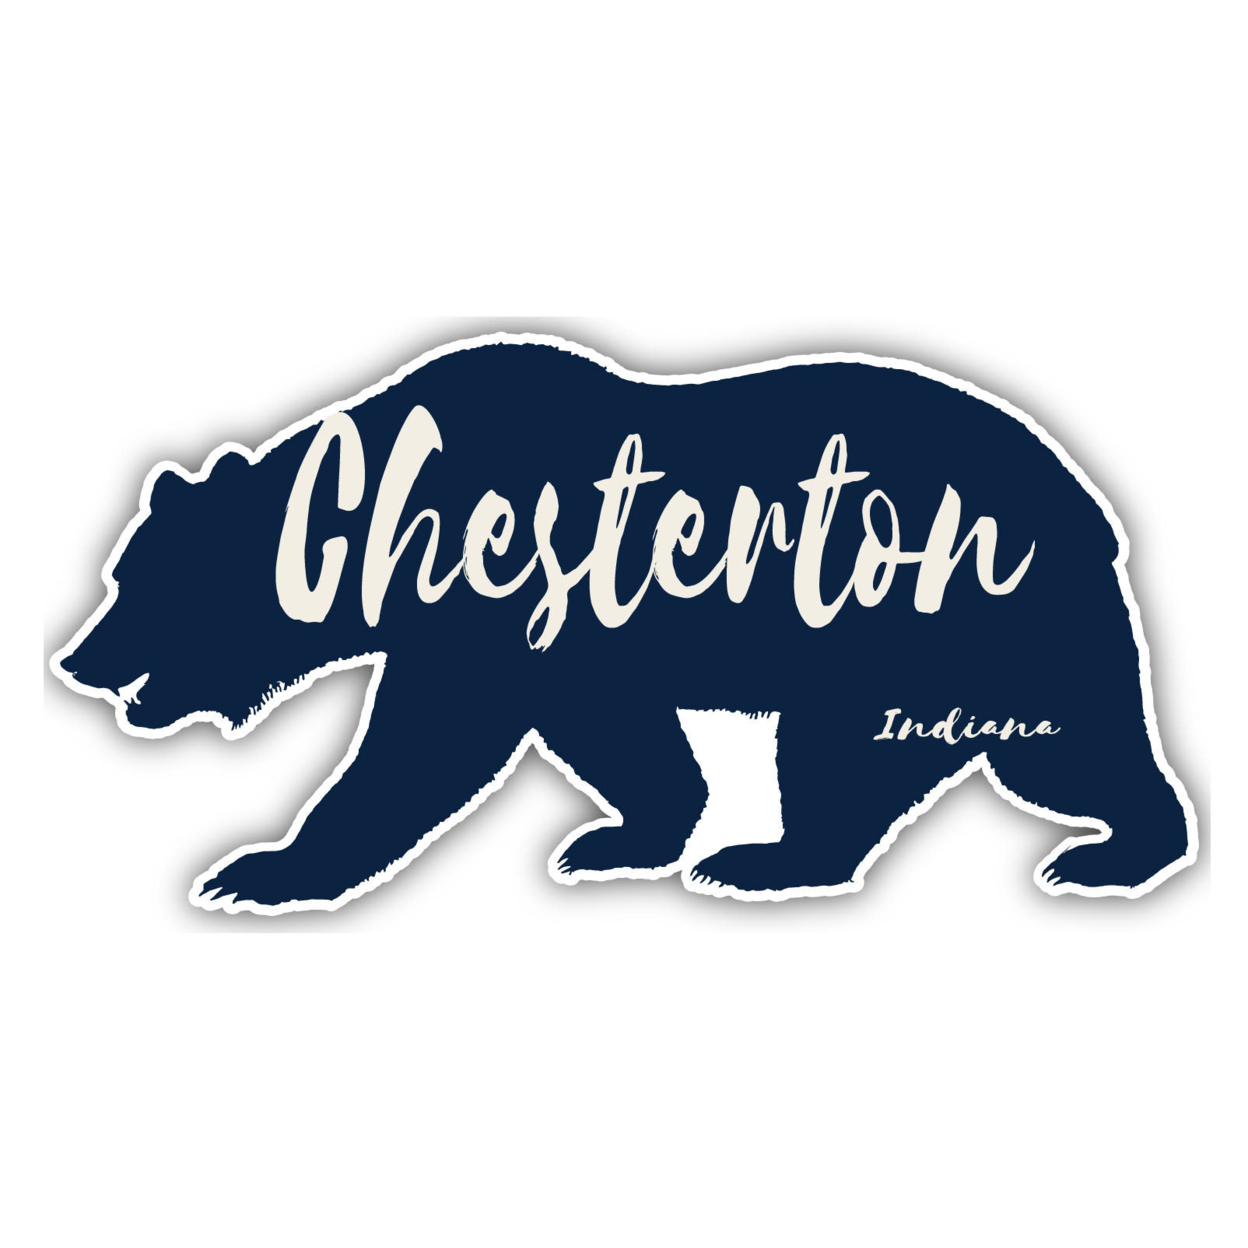 Chesterton Indiana Souvenir Decorative Stickers (Choose Theme And Size) - 4-Pack, 12-Inch, Tent